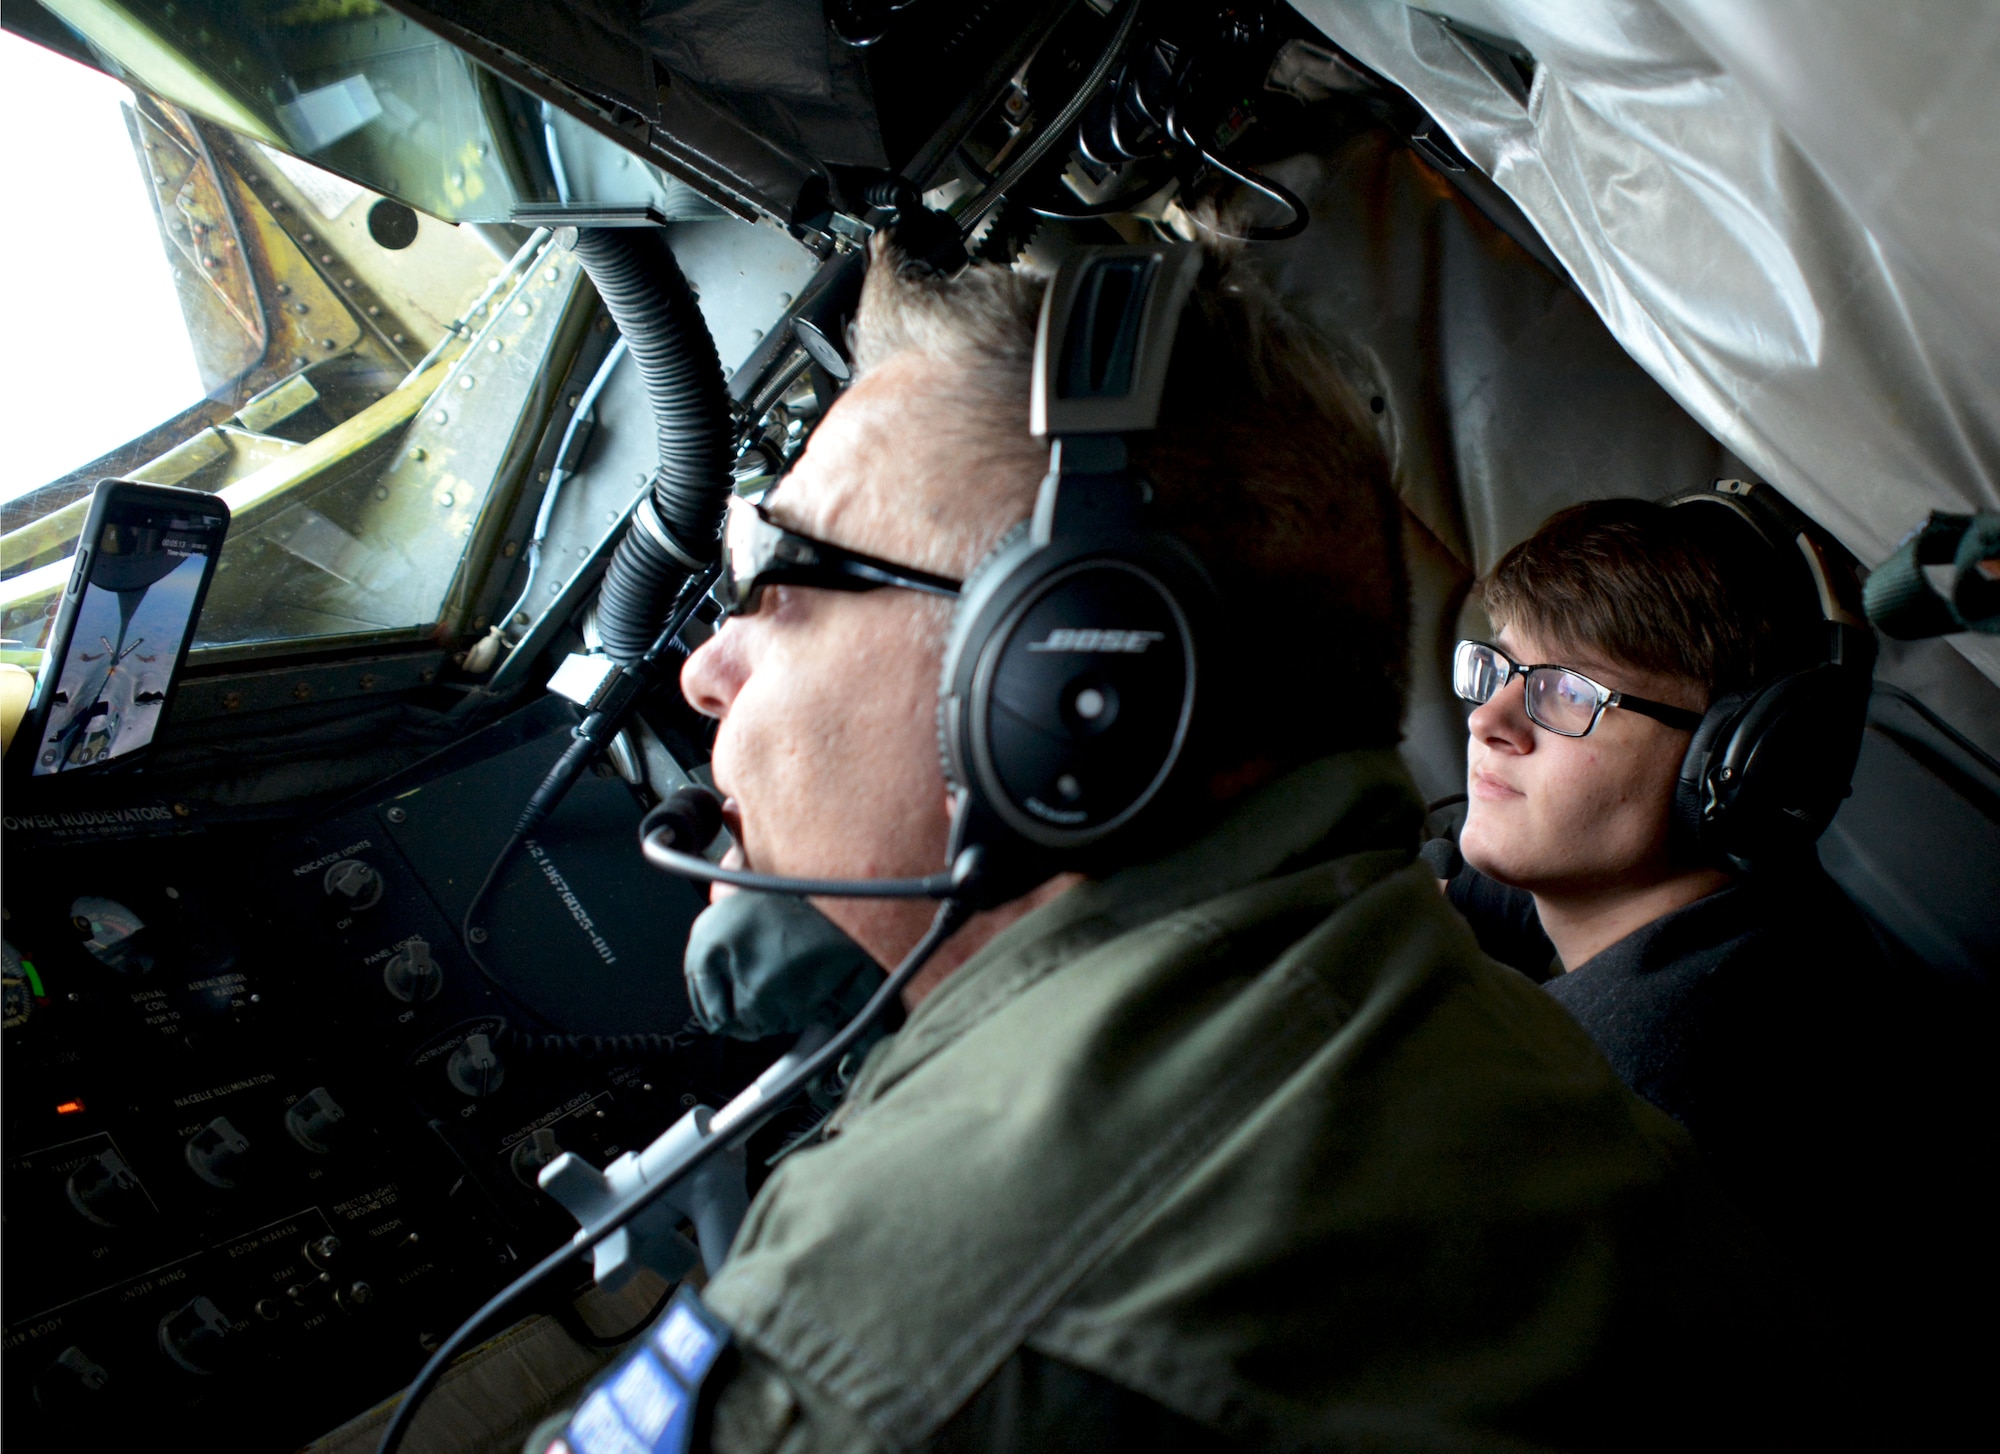 Senior Master Sgt. Darby Perrin, 465th Air Refueling Squadron boom operator, demonstrates refueling a B-2 Spirit bomber to his son Garrett Perrin, an Organization of Black Aerospace Professionals student, while flying in a 507th Air Refueling Wing KC-135 Stratotanker here June 20, 2017. Twenty-seven young OBAP aviators observed how the Air Force Reserve directly fuels the fight through preparation, training and striving for combat-readiness during their three-hour long orientation flight. (U.S. Air Force photo/Staff Sgt. Samantha Mathison)